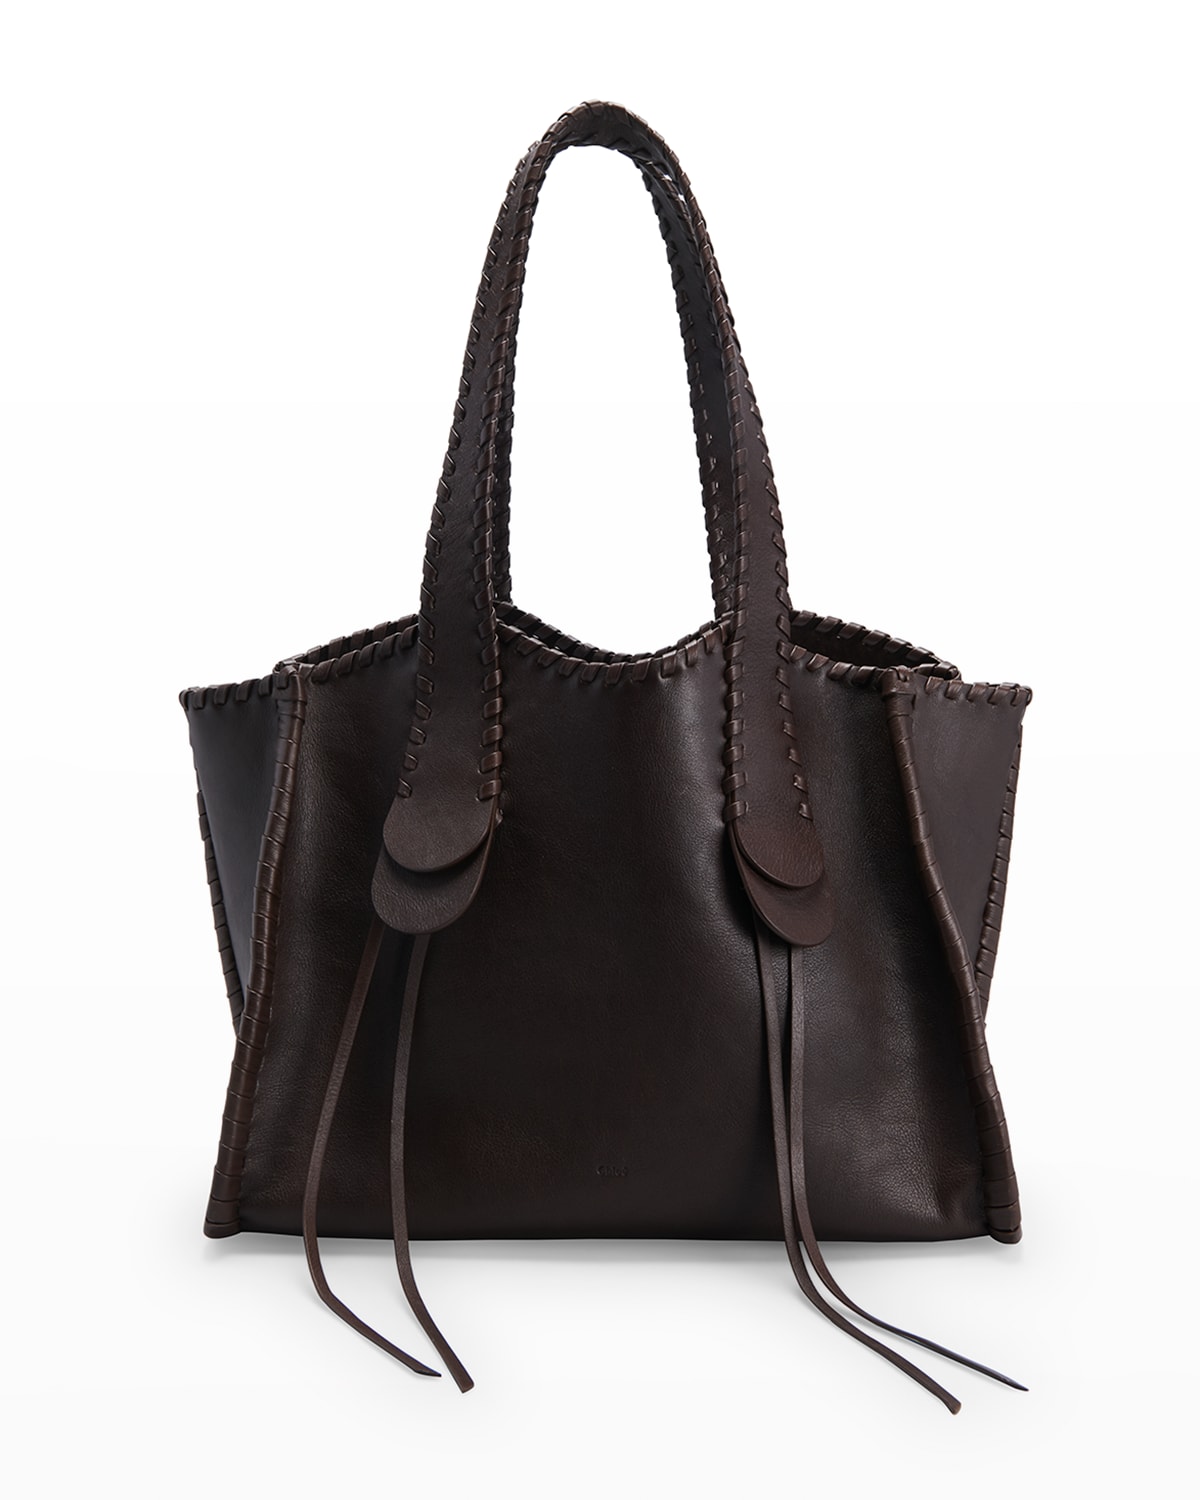 CHLOÉ MONY LARGE WHIPSTITCH LEATHER TOTE BAG